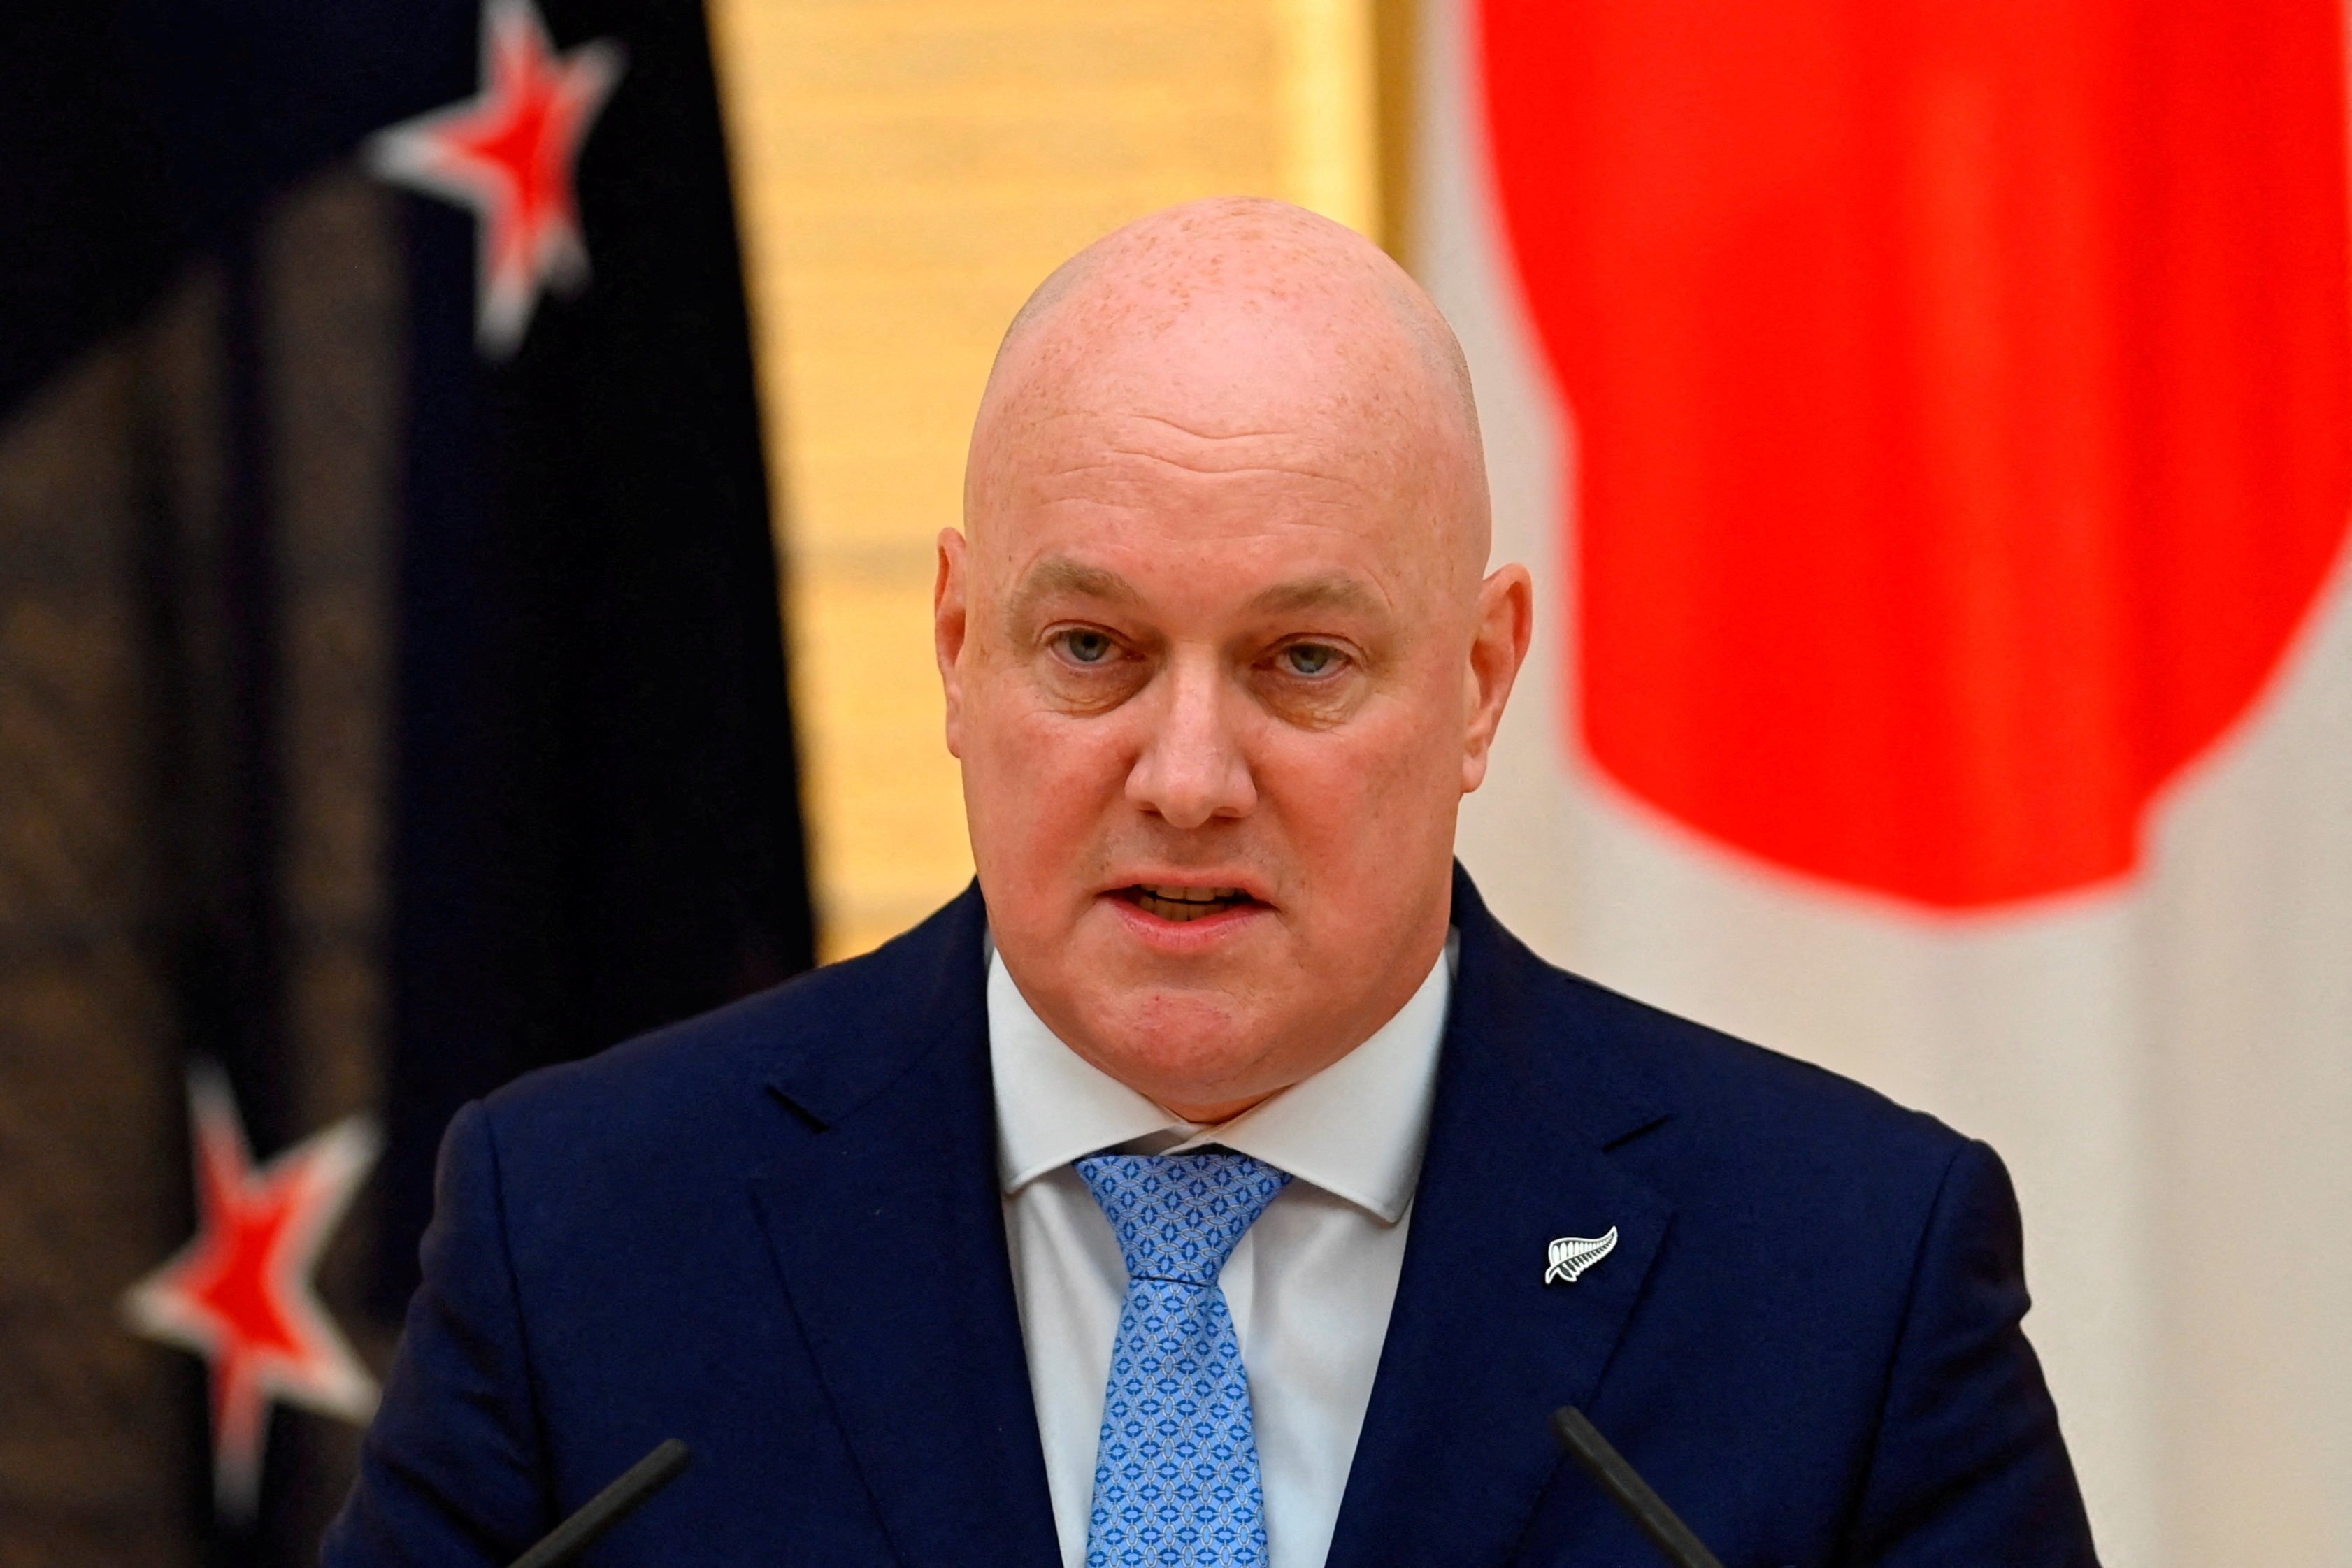 New Zealand Prime Minister Christopher Luxon. File photo: Pool/Reuters